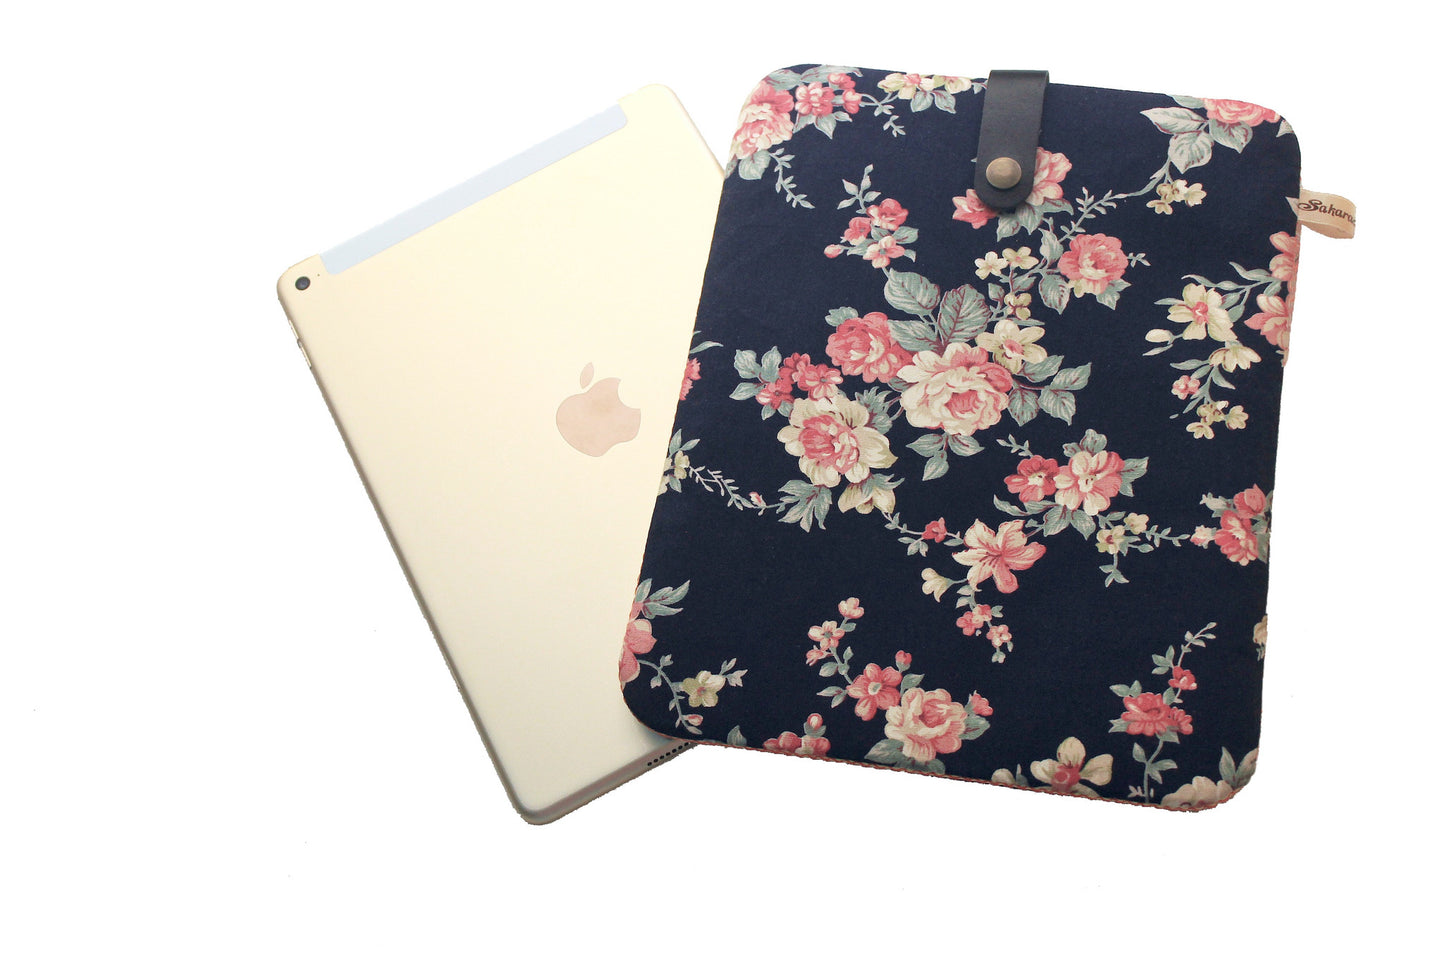 Apple iPad Air 2 and iPad Pro 9.7 Inch Cover - Best 9.7 Inch Tablet Case - Nefficar